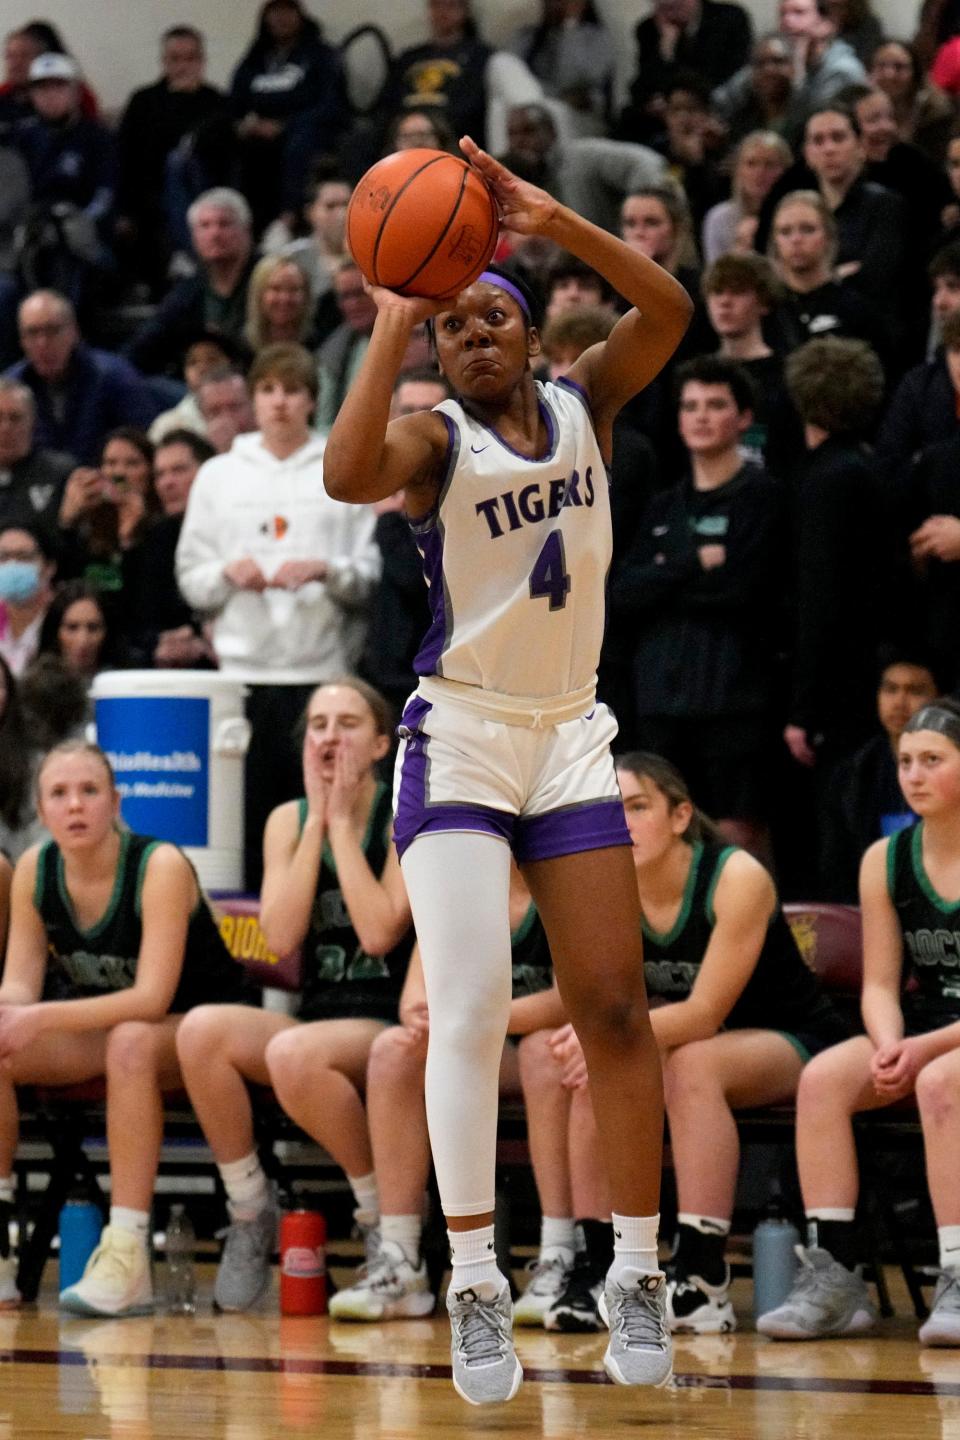 Pickerington Central's Madison Greene was named Central District Division I girls player of the year.